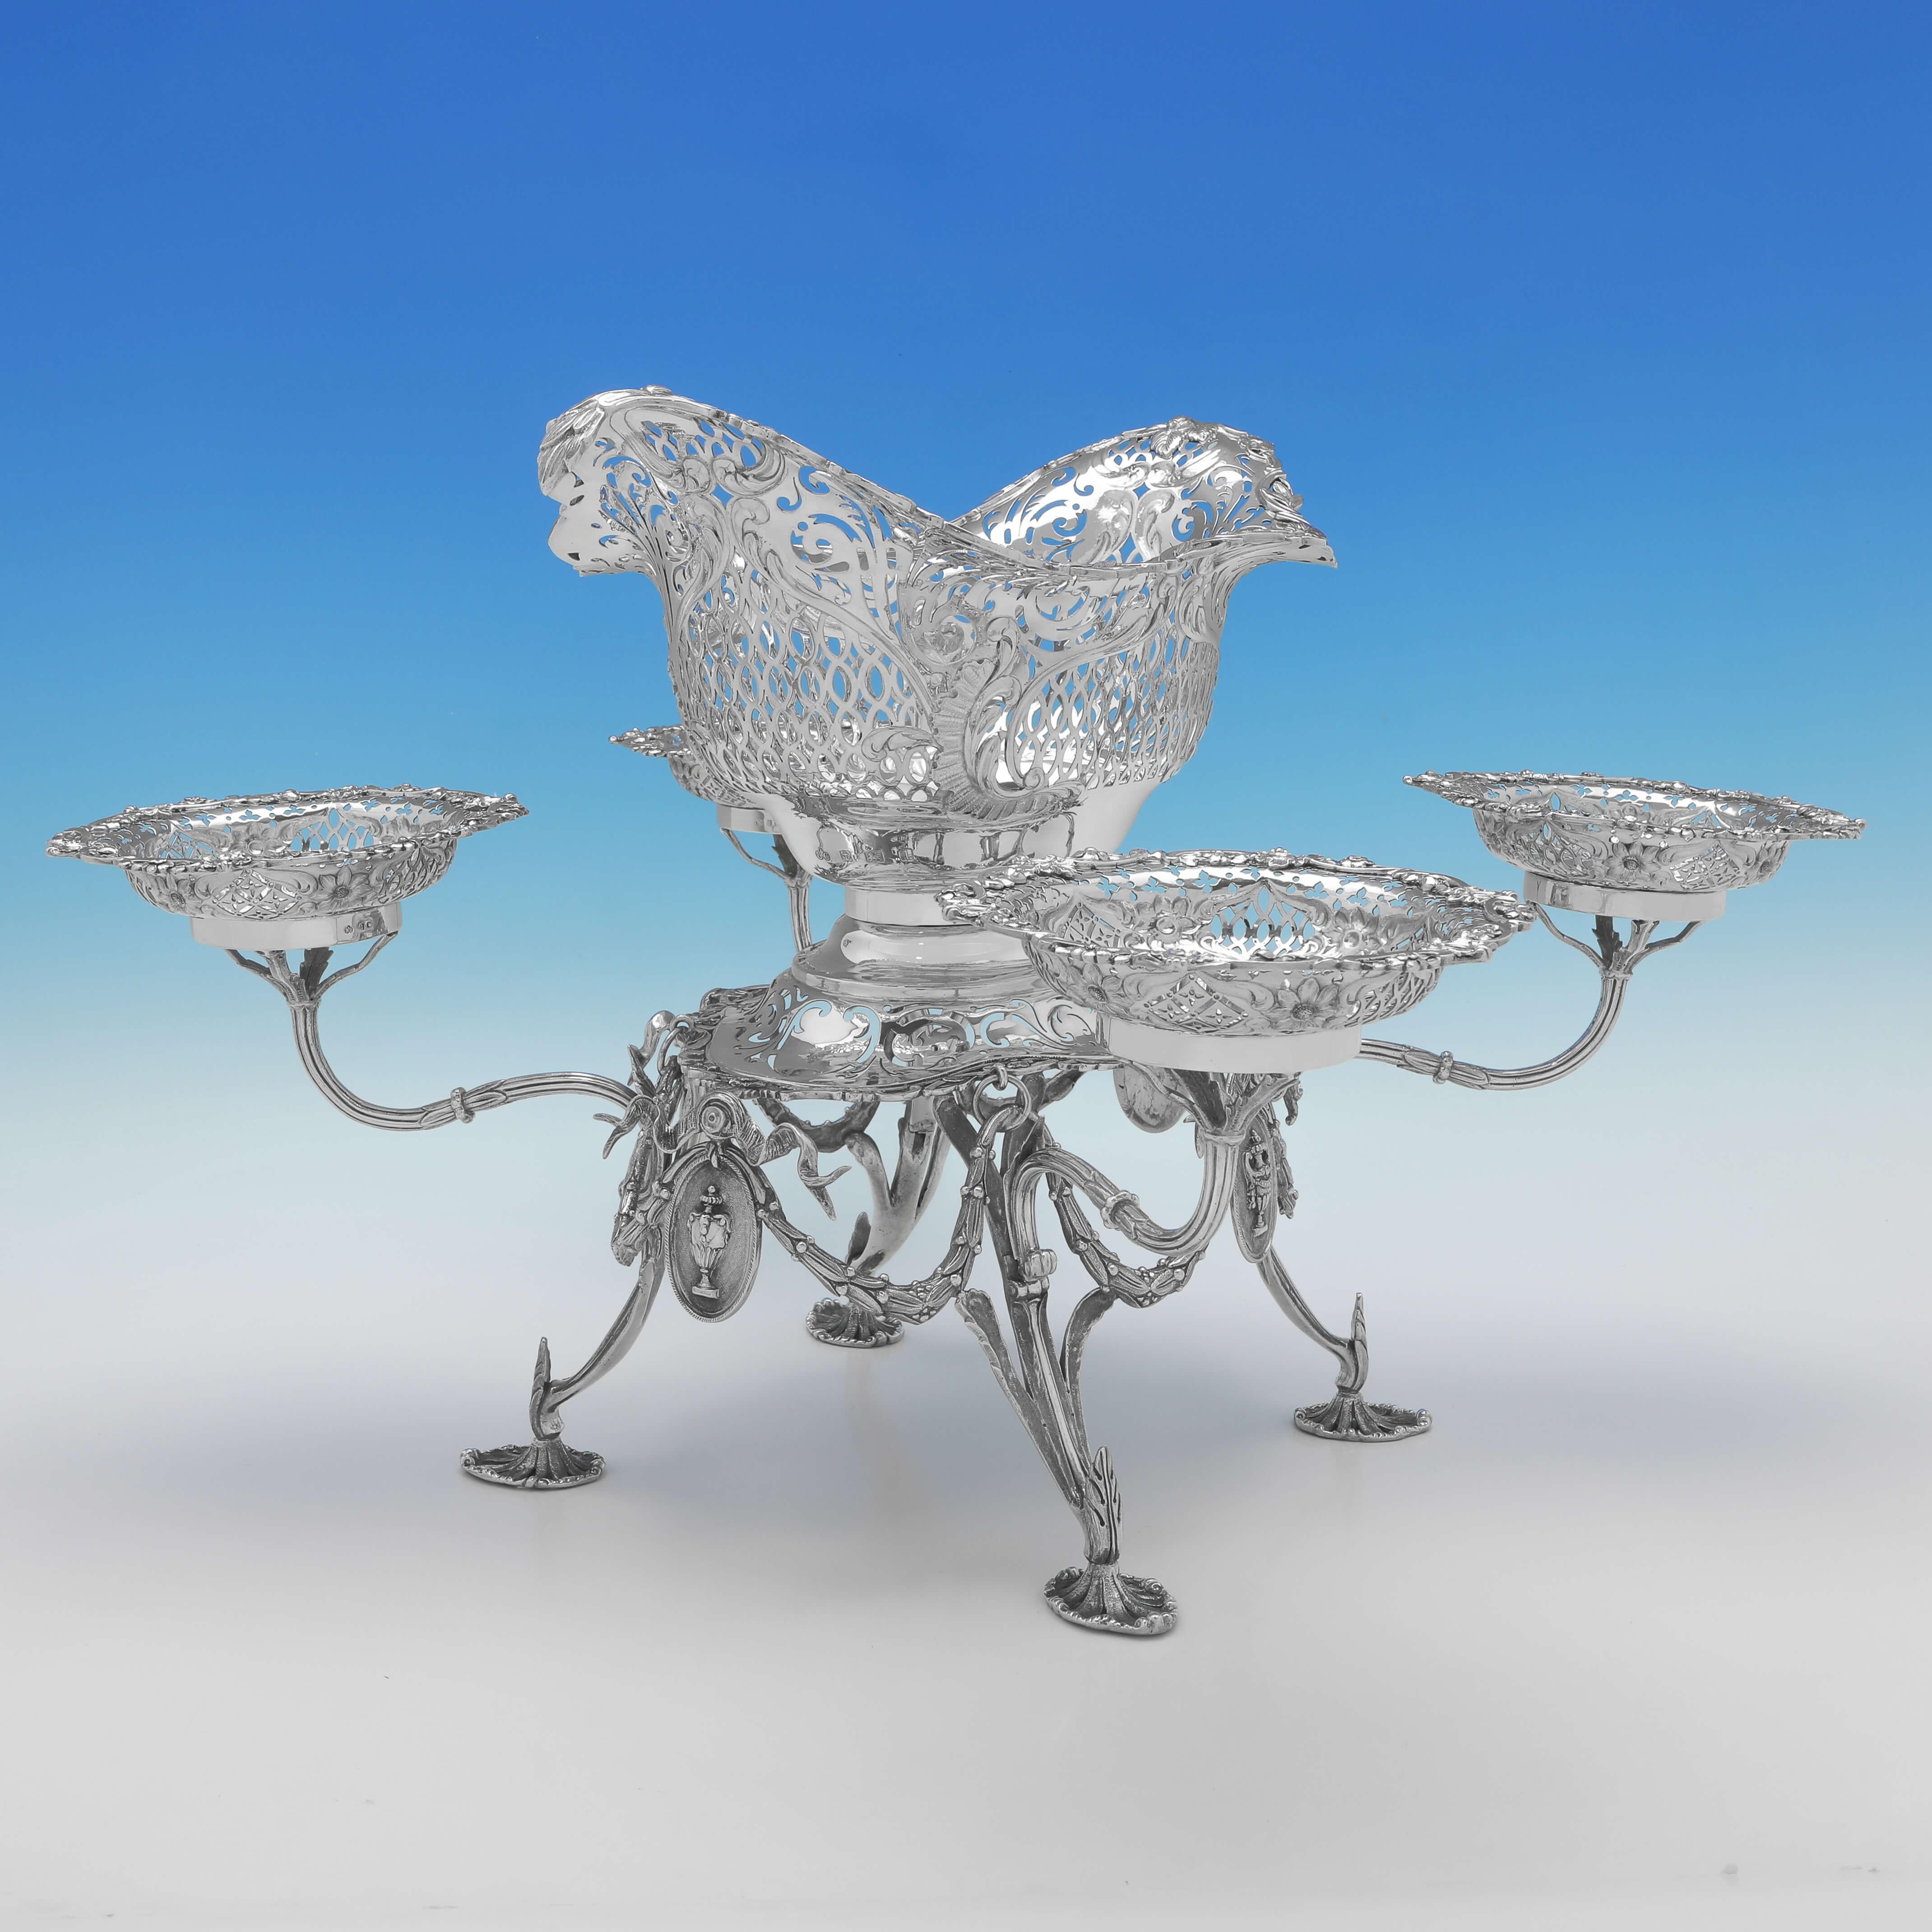 Neoclassical Revival Antique Edwardian Sterling Silver Centrepiece Epergne, 1910 In Good Condition For Sale In London, London